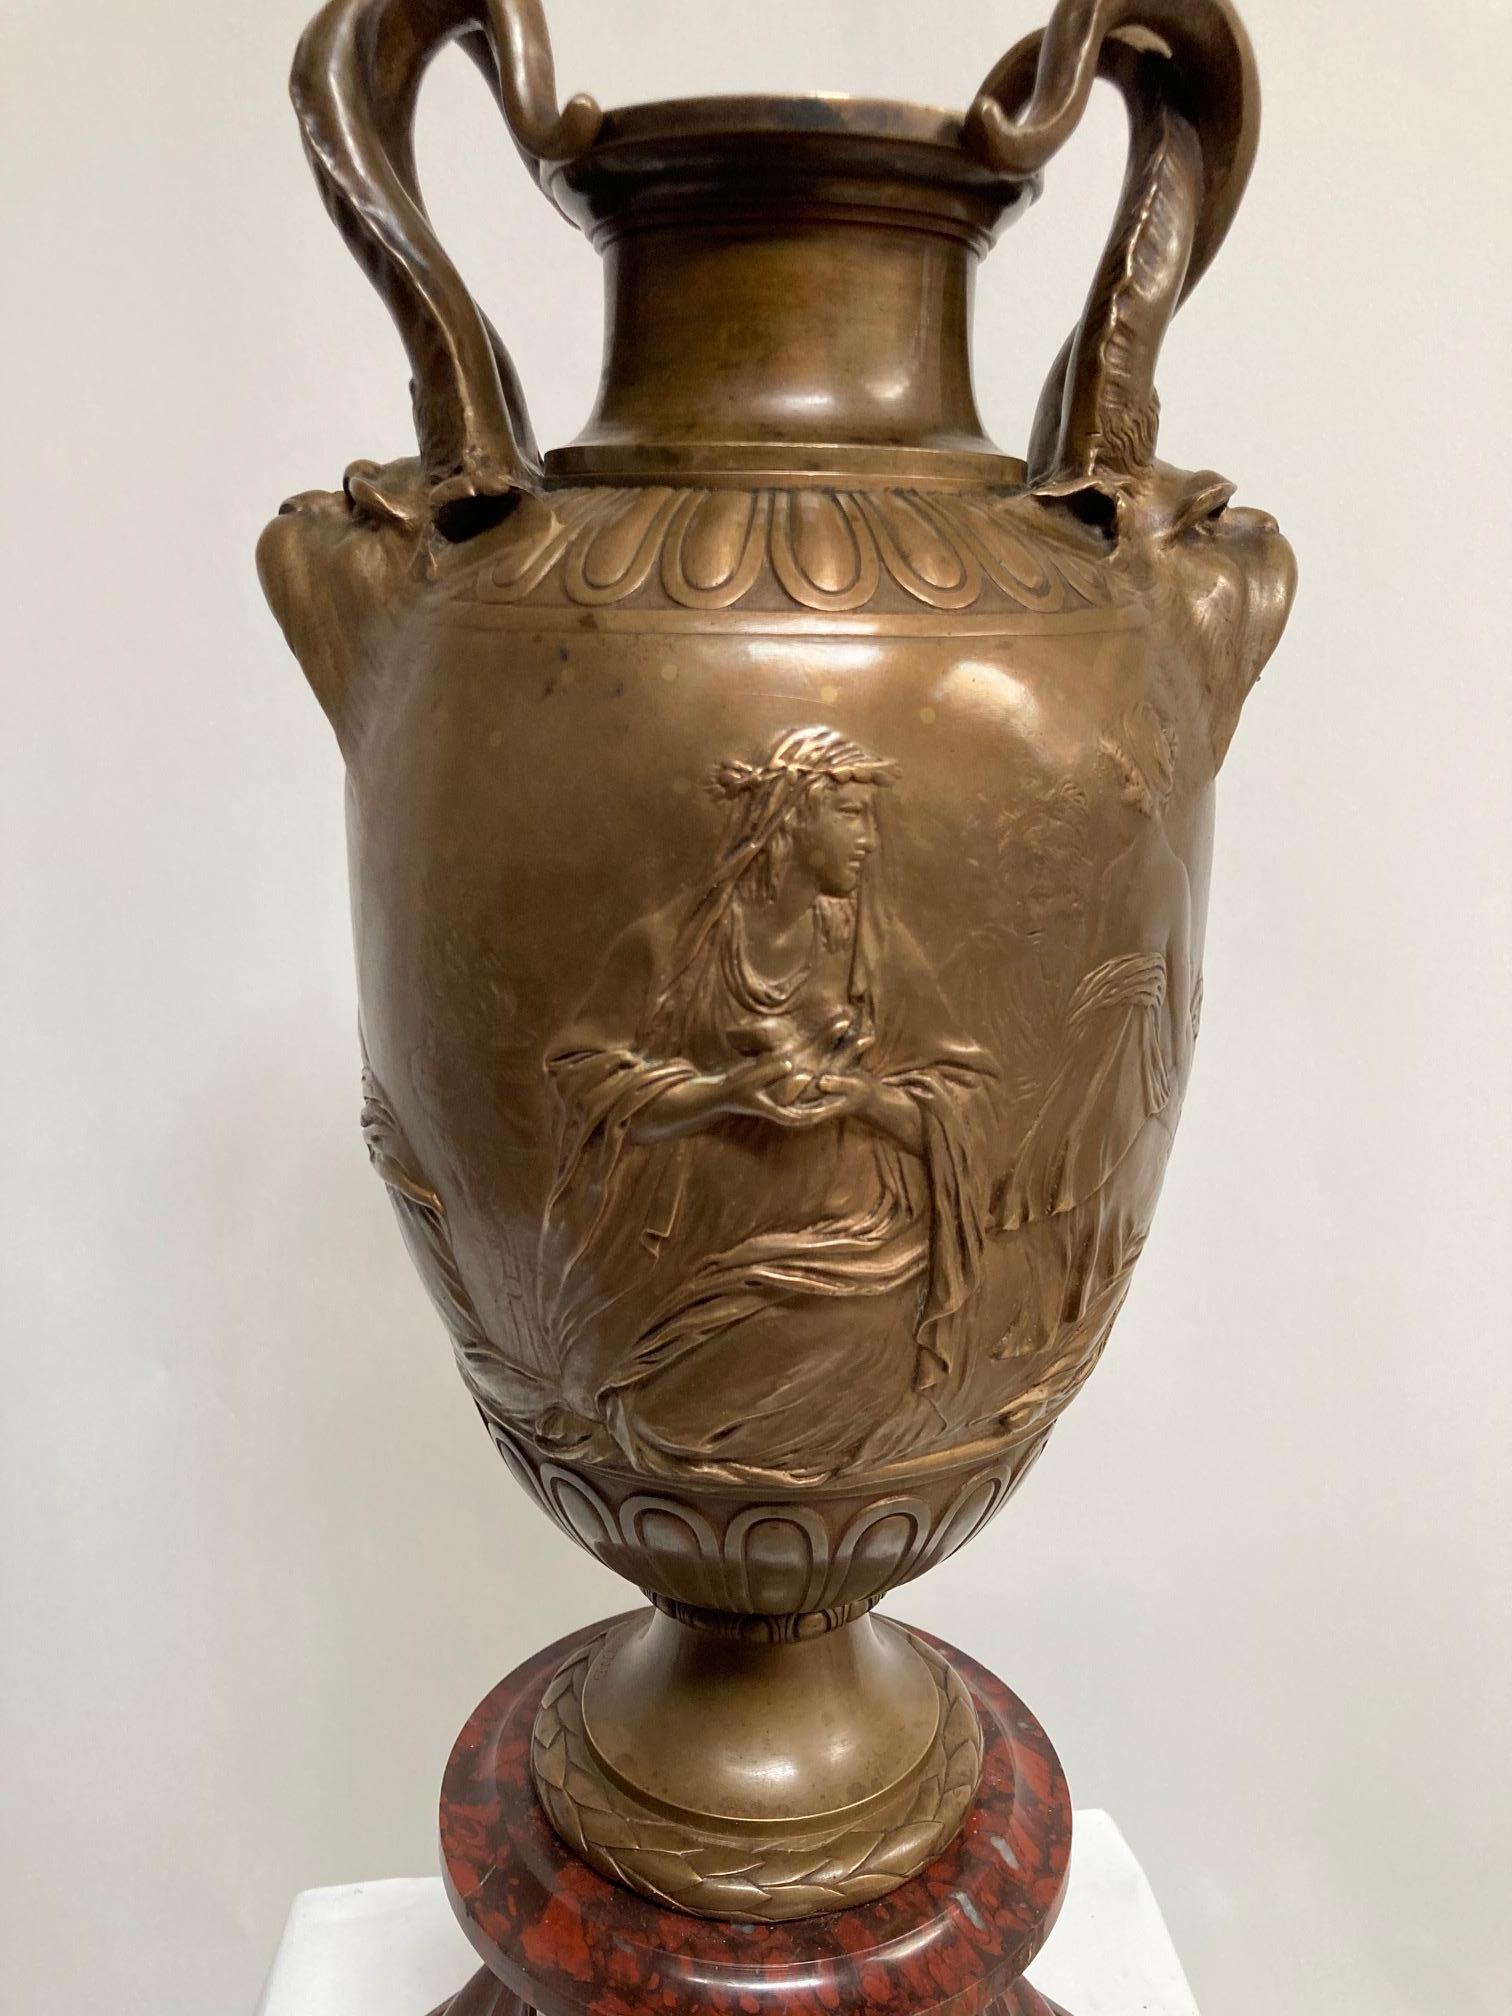 XIX century Neo-Classic bronze vase by Ferdinand Barbedienne
Red marble base
Signed
France
Circa 1850 -1870.